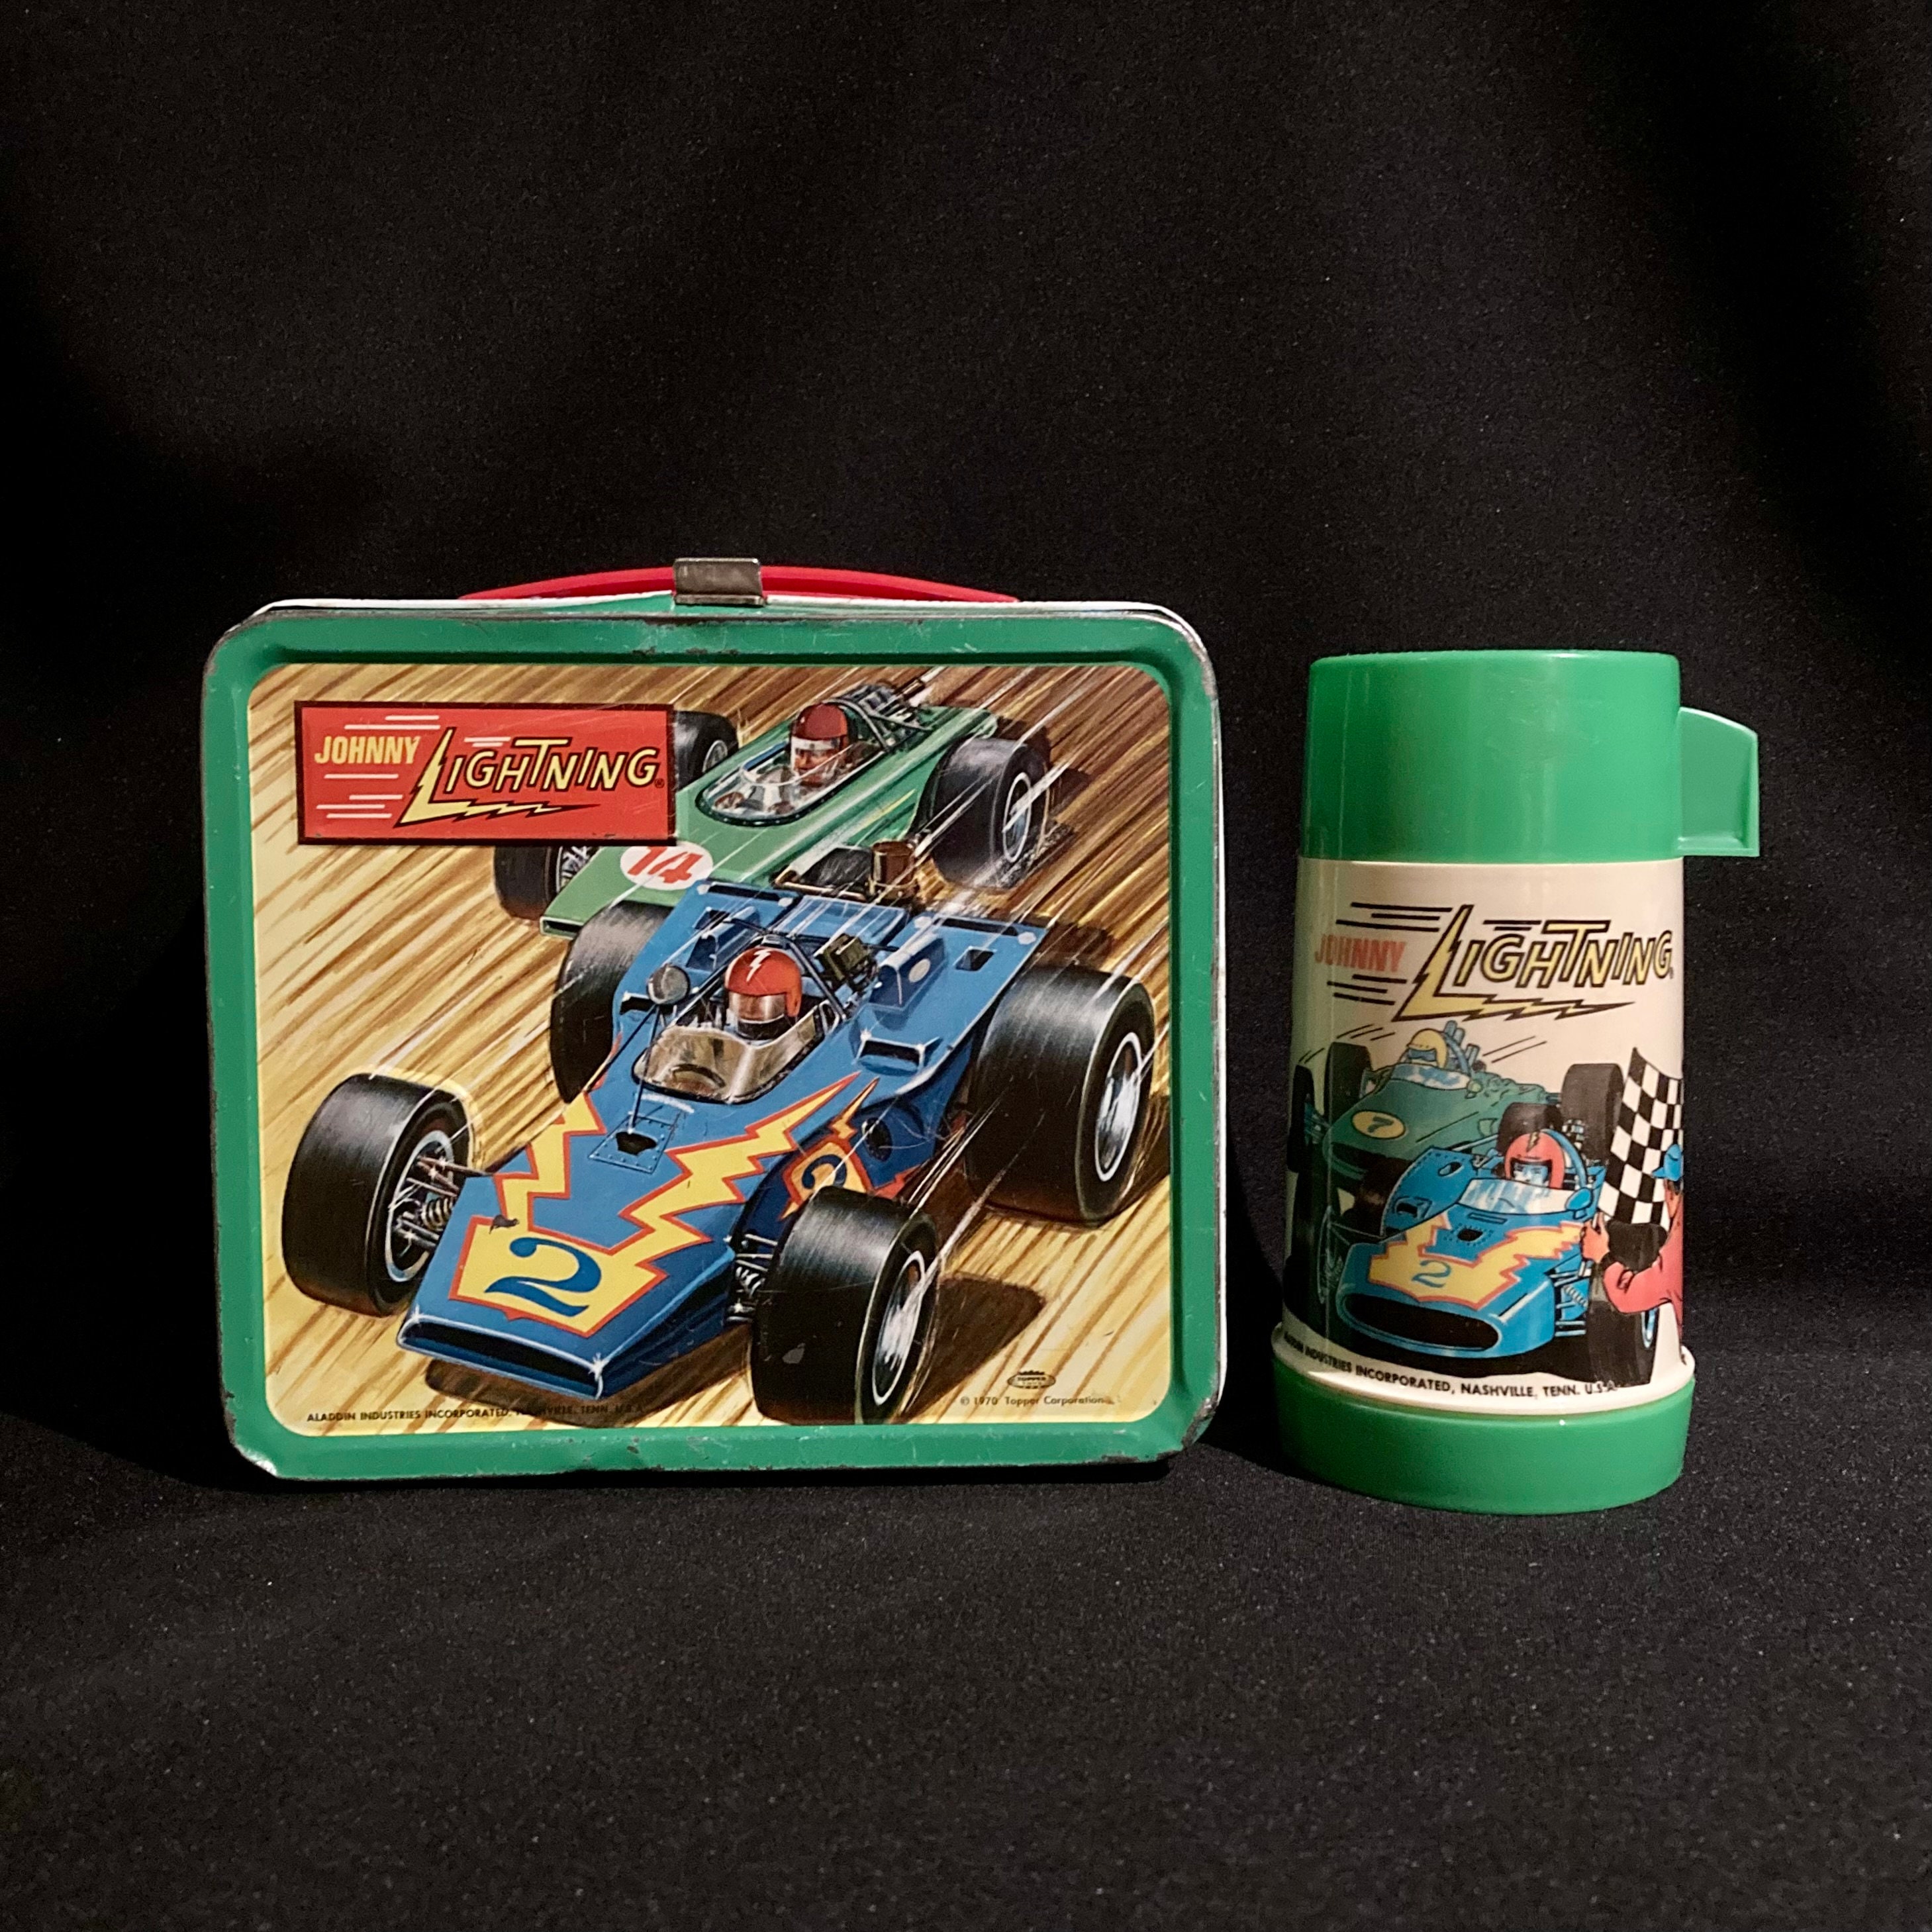 AUTO RACE THERMOS, King-seeley, Steel Bottle No. 2806, 1967, Vintage  Lunchbox, Collectible, Car or Racing Decor 